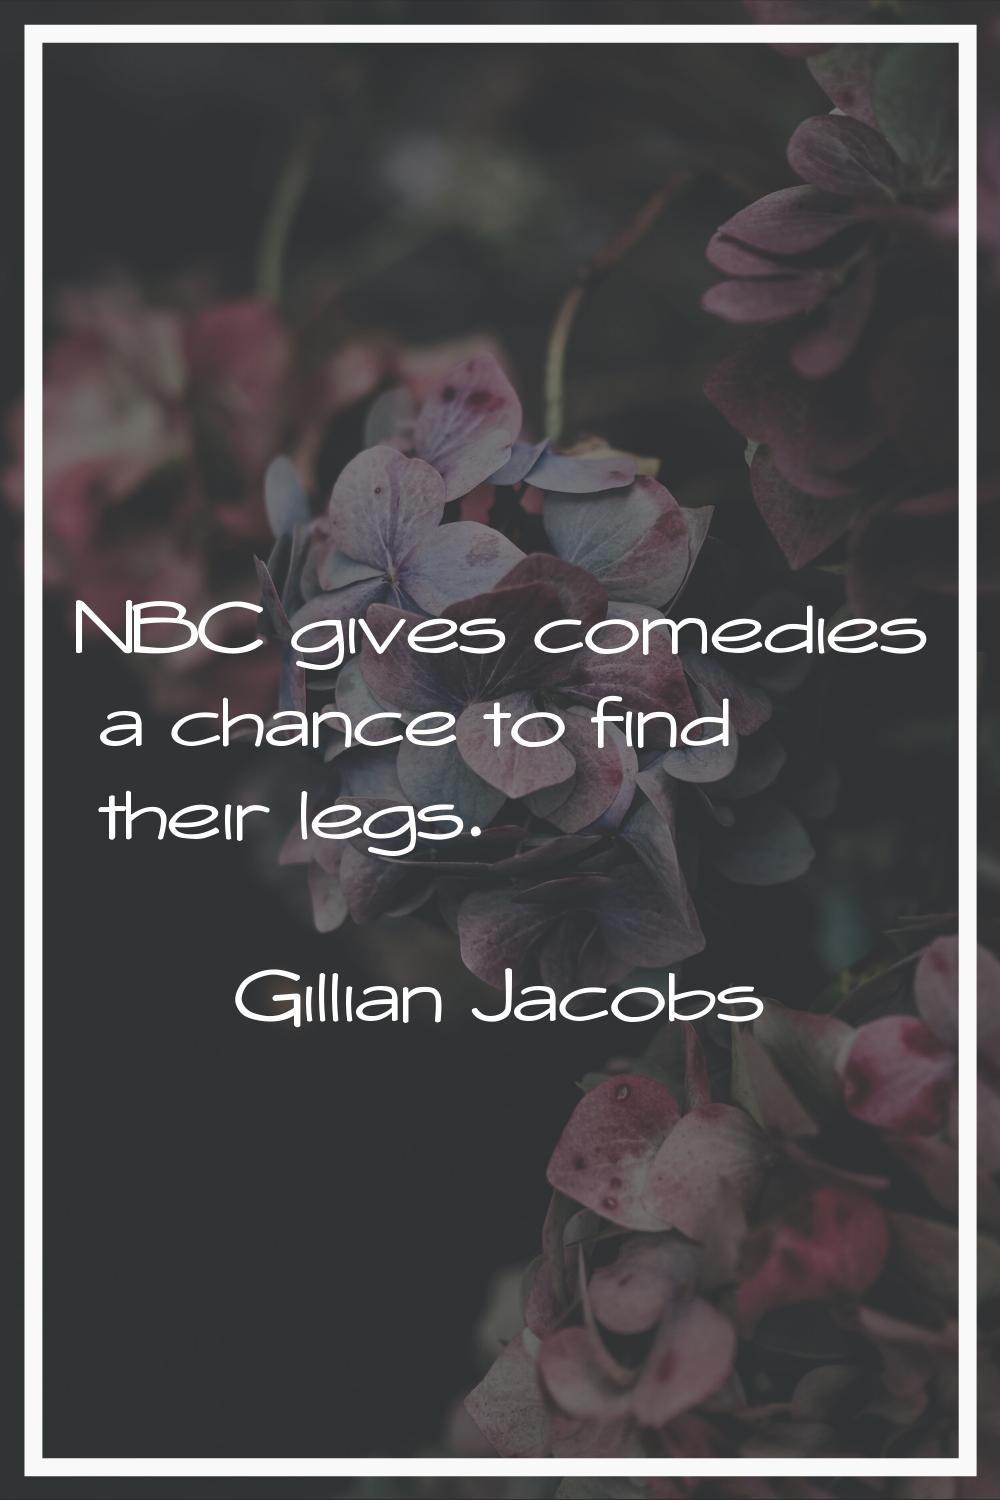 NBC gives comedies a chance to find their legs.